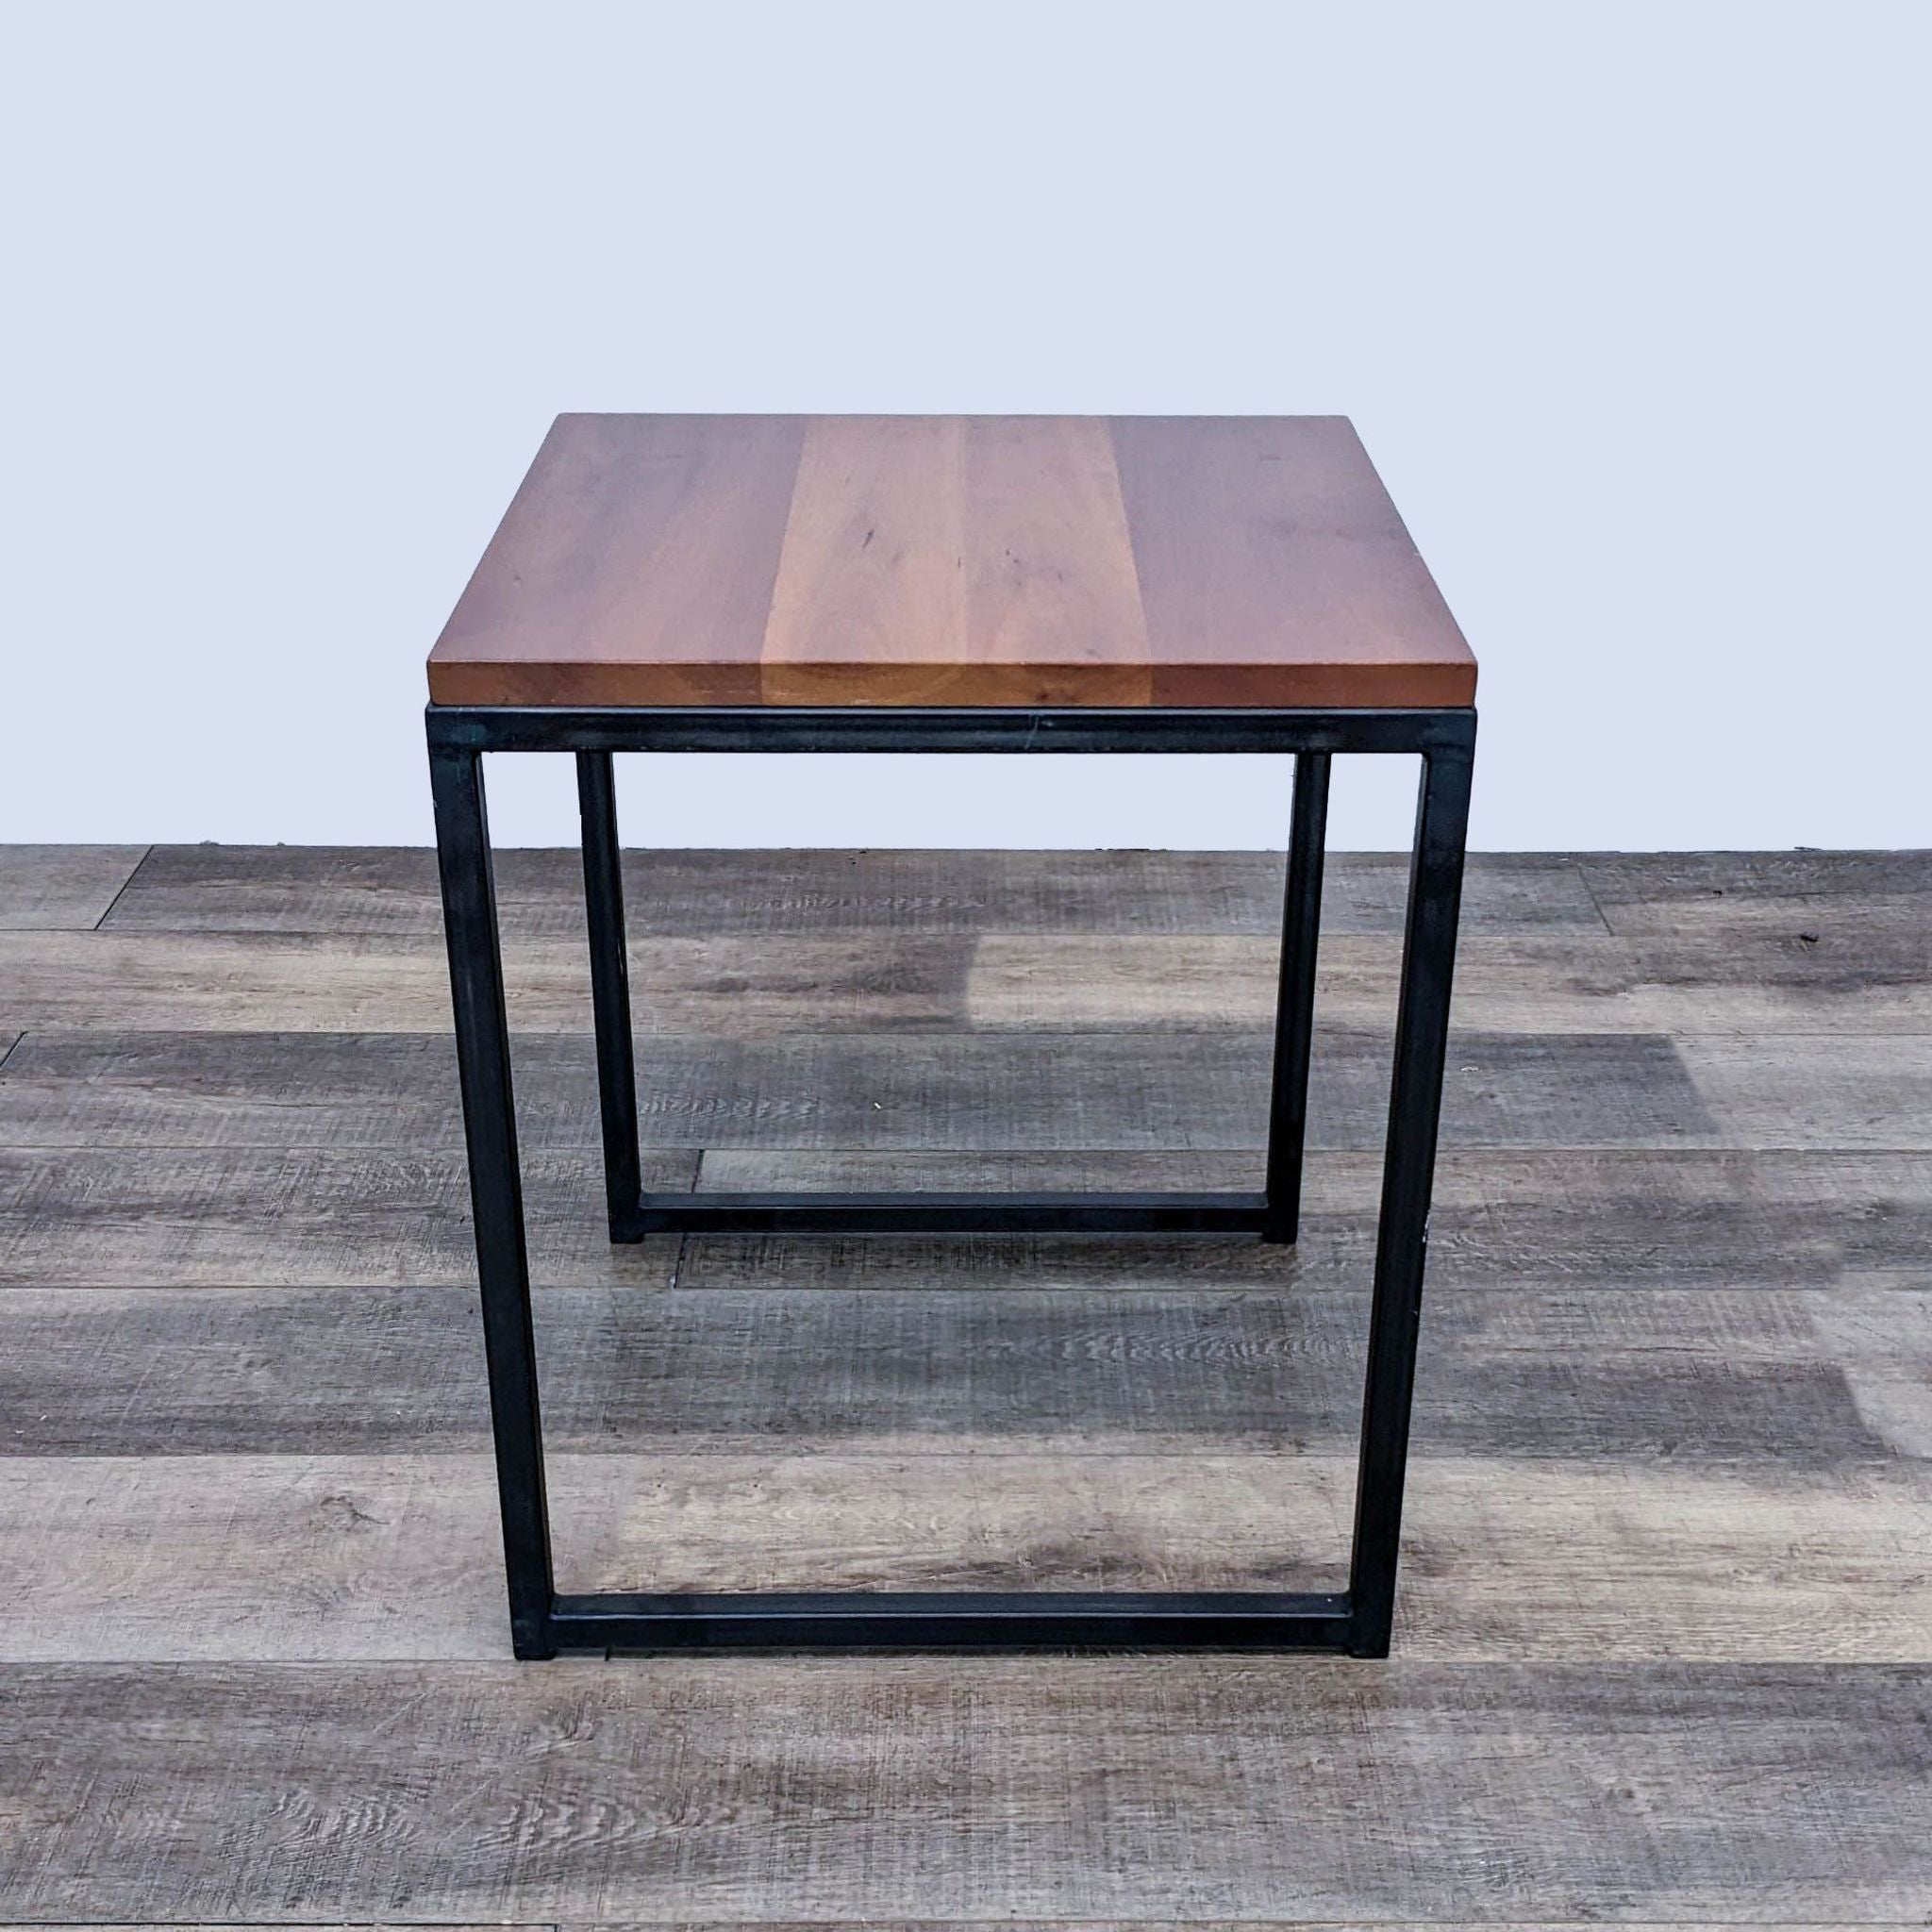 End table by Reperch featuring a geometric metal base and rectangular wooden surface, against a simple backdrop.